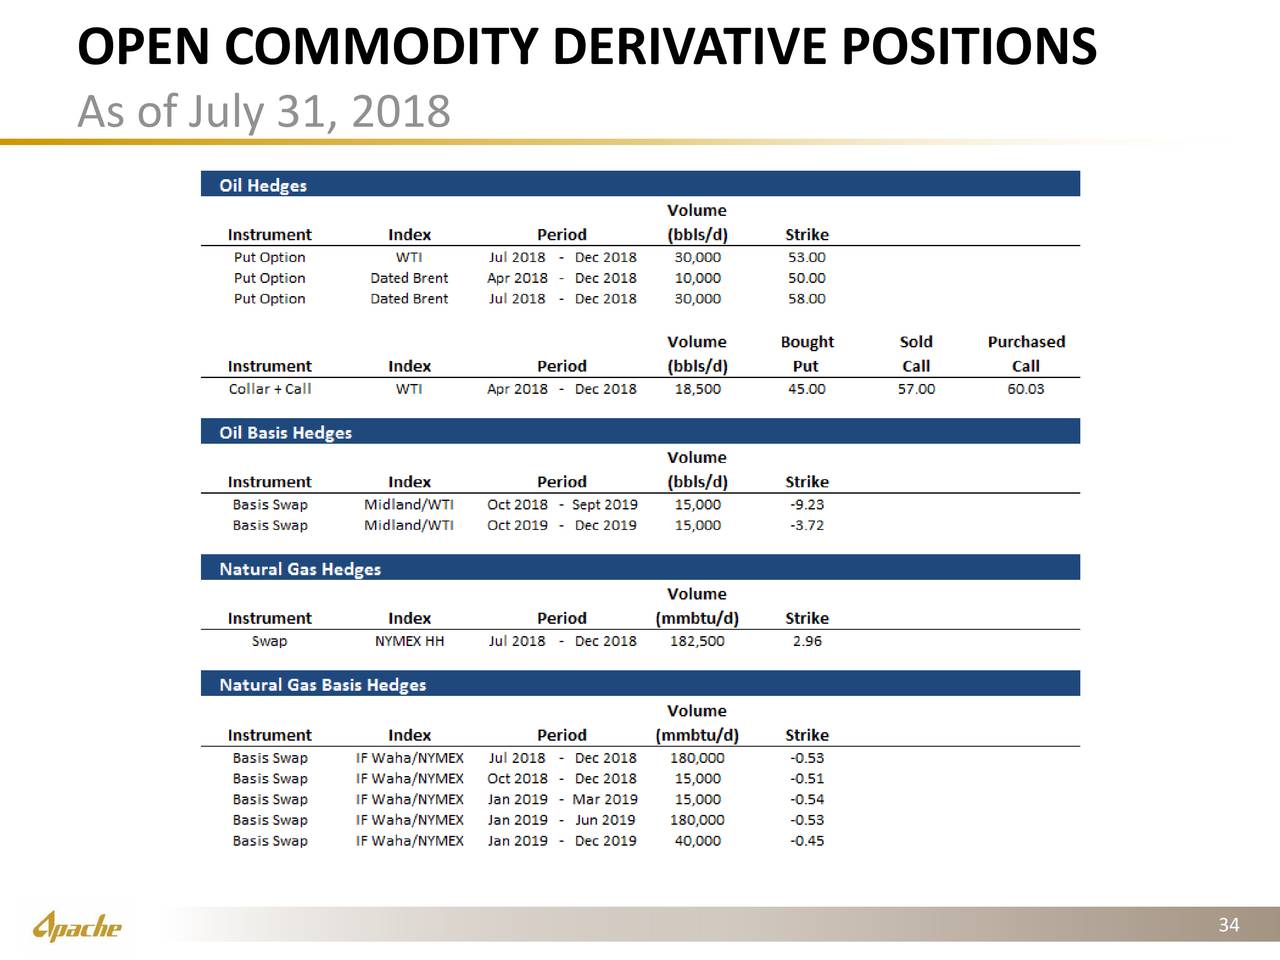 OPEN COMMODITY DERIVATIVE POSITIONS